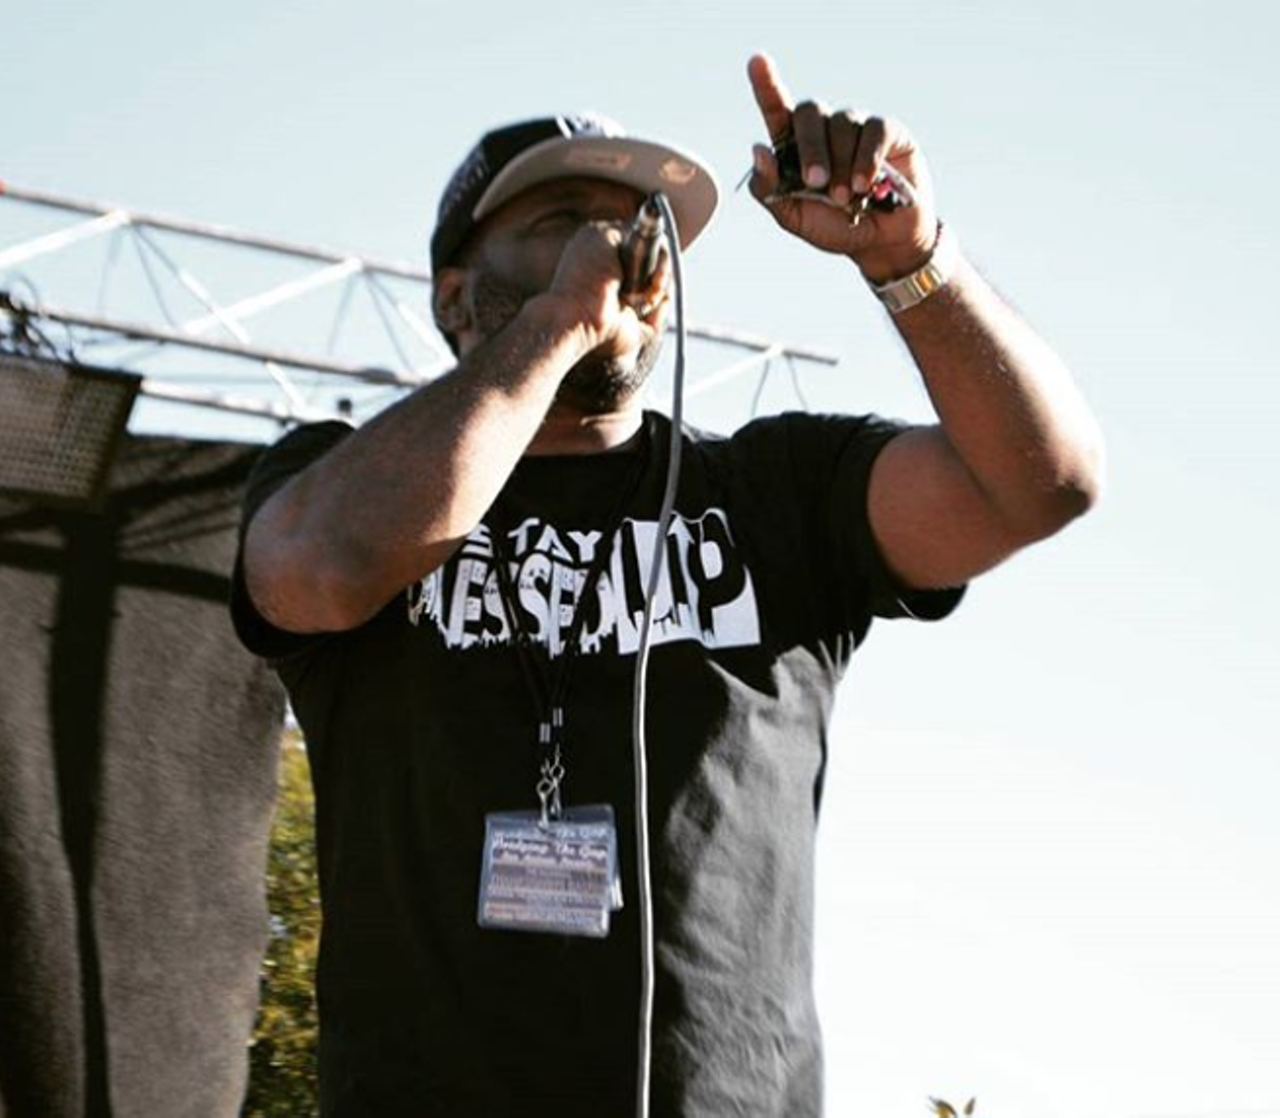 Dre' L.O.C.
Thursday, March 15, 9:10- 9:20pm
Husband, father, pastor and rapper, Dre’ L.O.C.’s musical vibe is reminiscent of ’90s “gangsta rap” in the vein of artists like Bone Thugs n Harmony, but lyrically the artist talks about his experience as a Christian.
Photo via Instagram / dreloc210